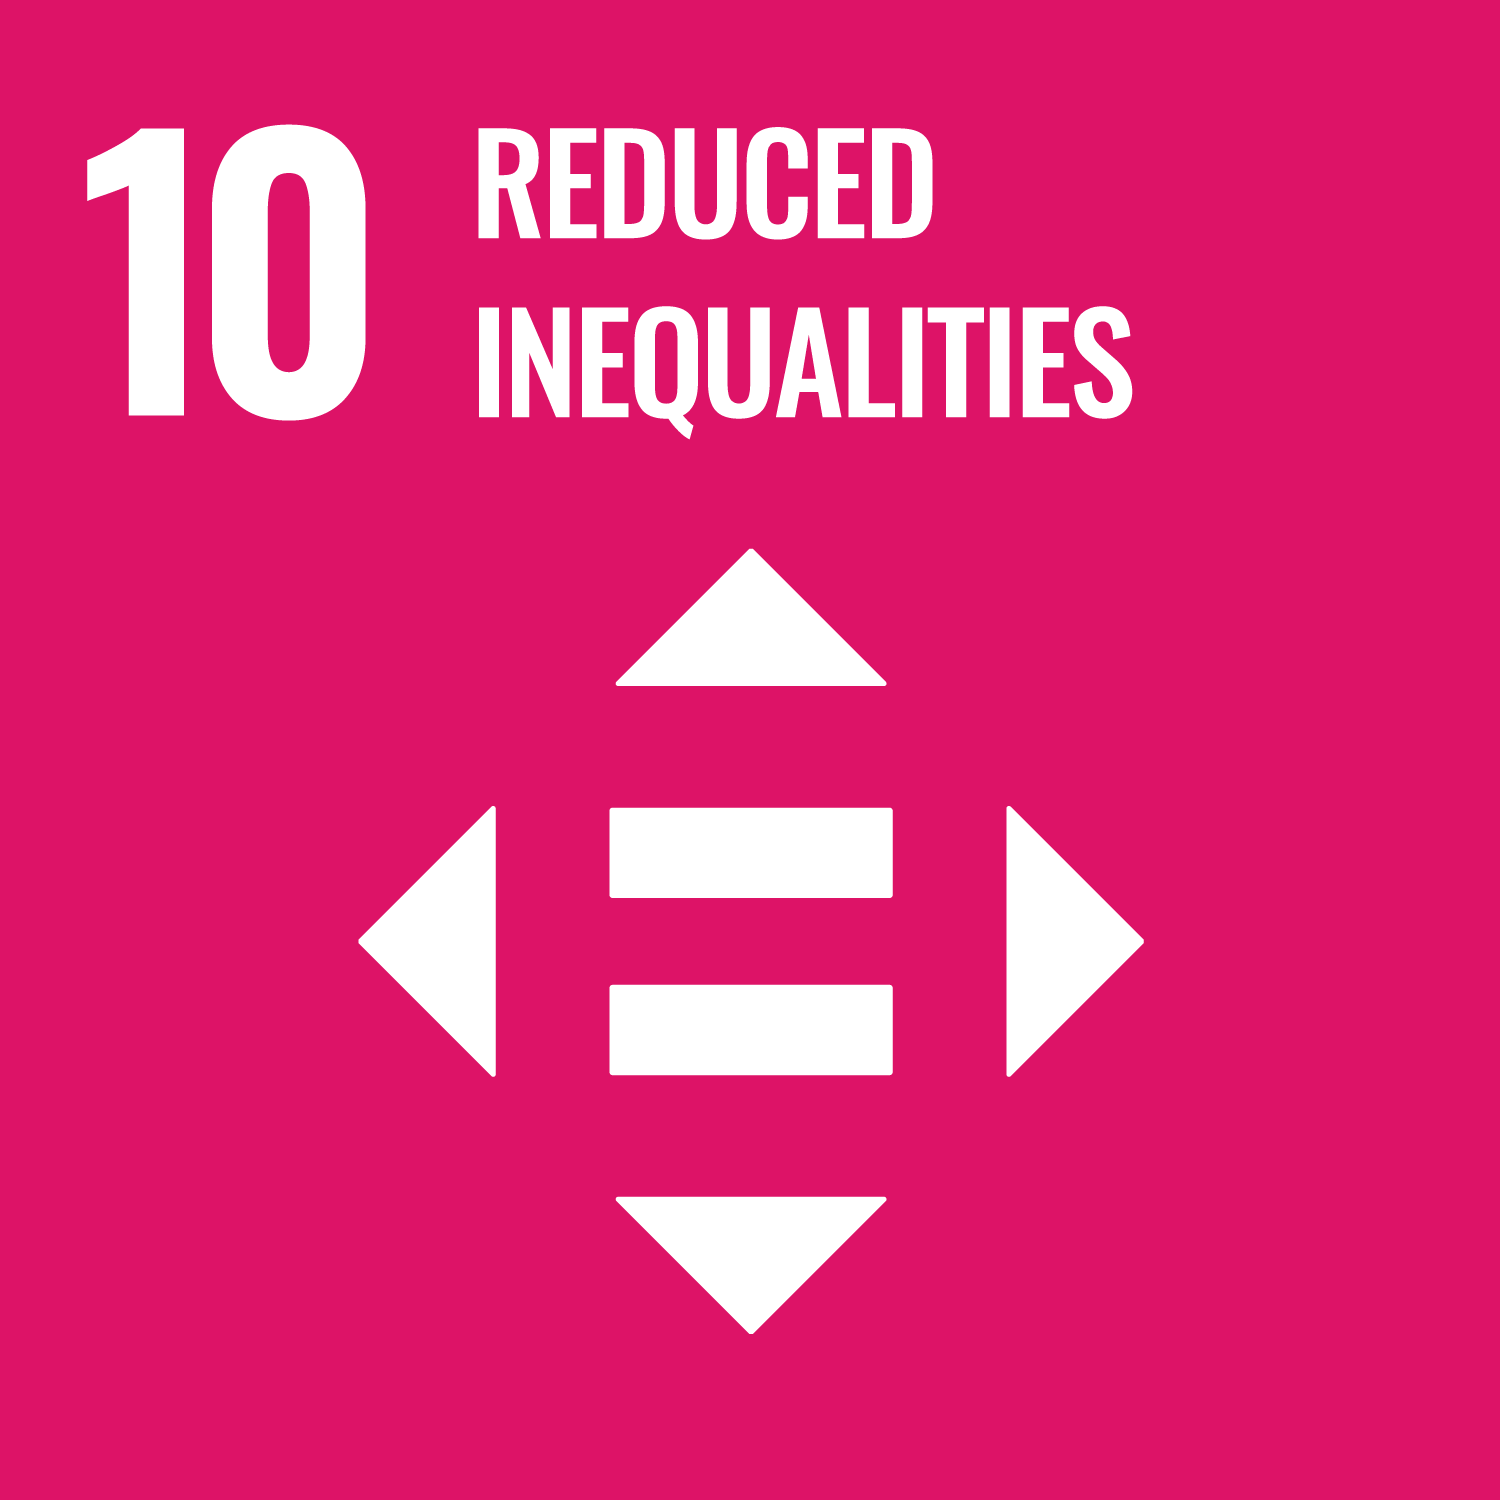 United Nations Sustainable Development Goal Number 10: Reduced Inequalities